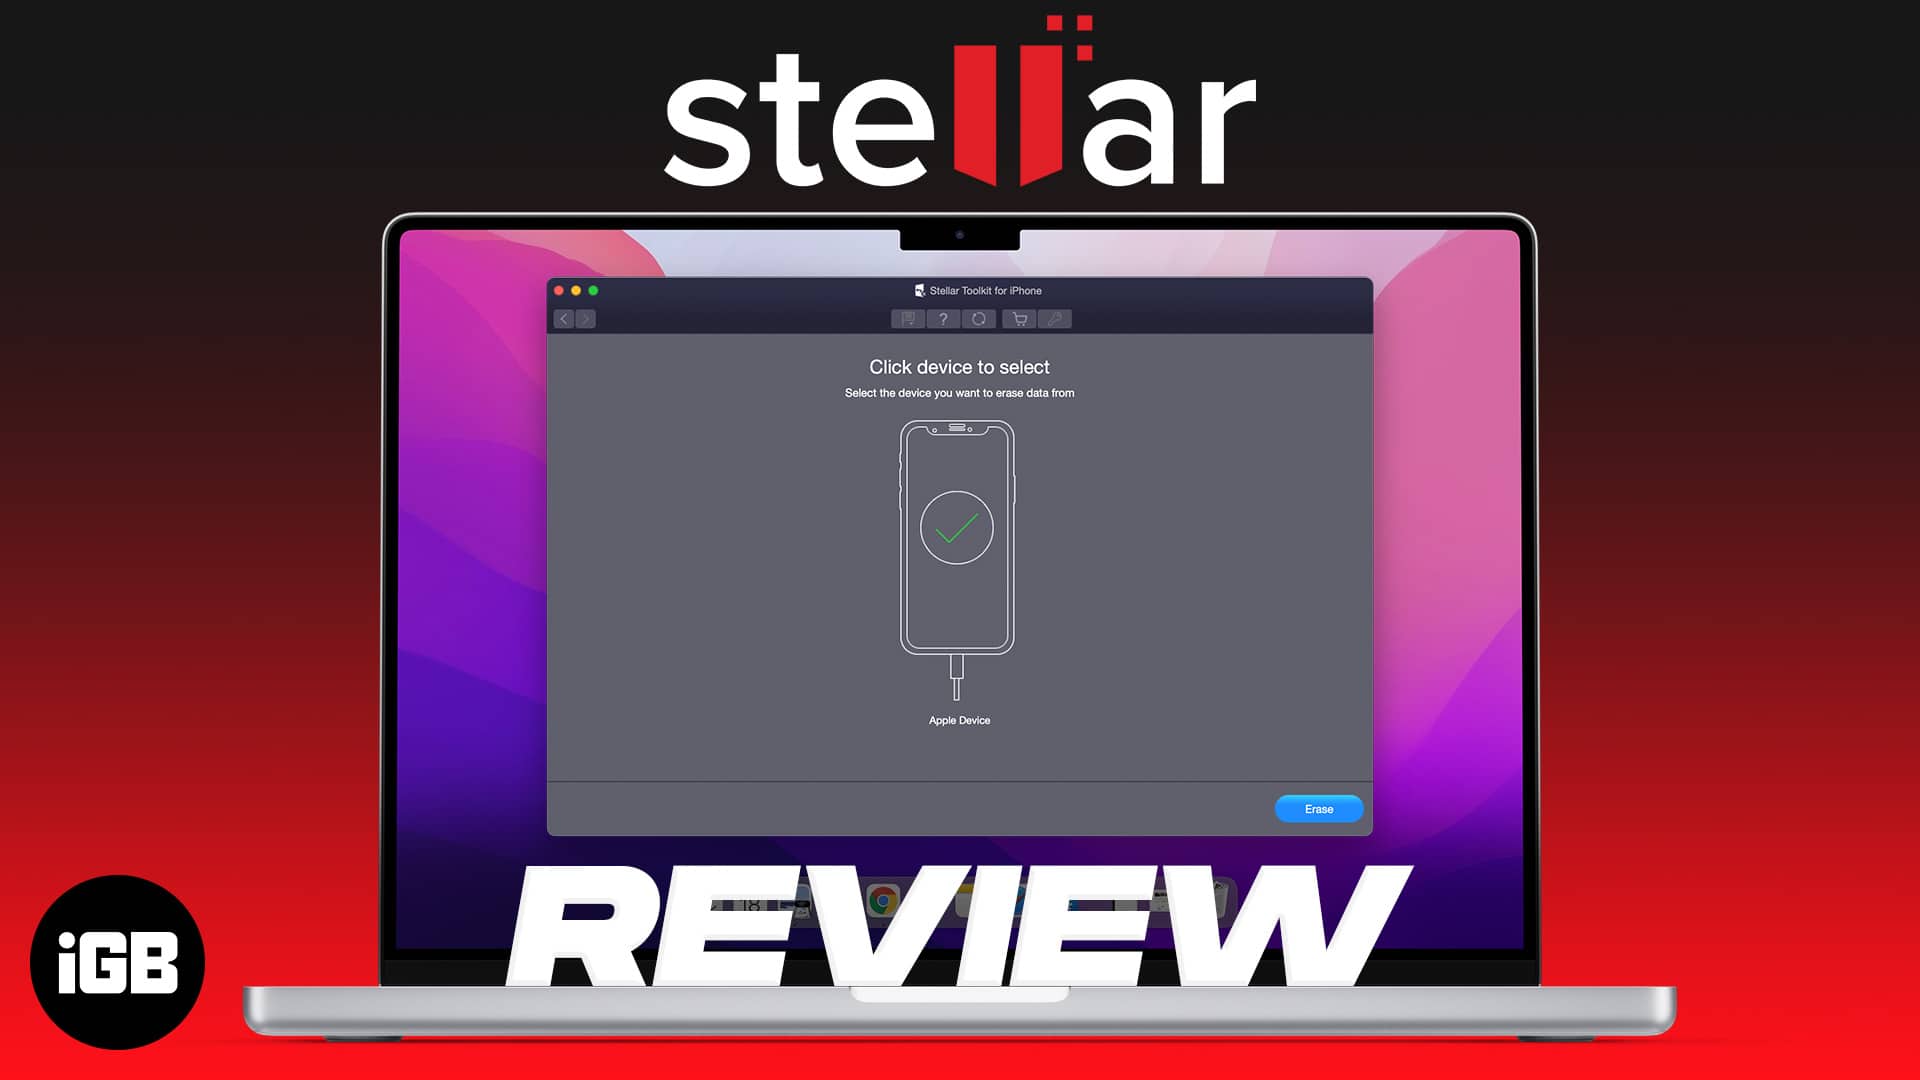 How to permanently delete all your iphone data using stellar eraser